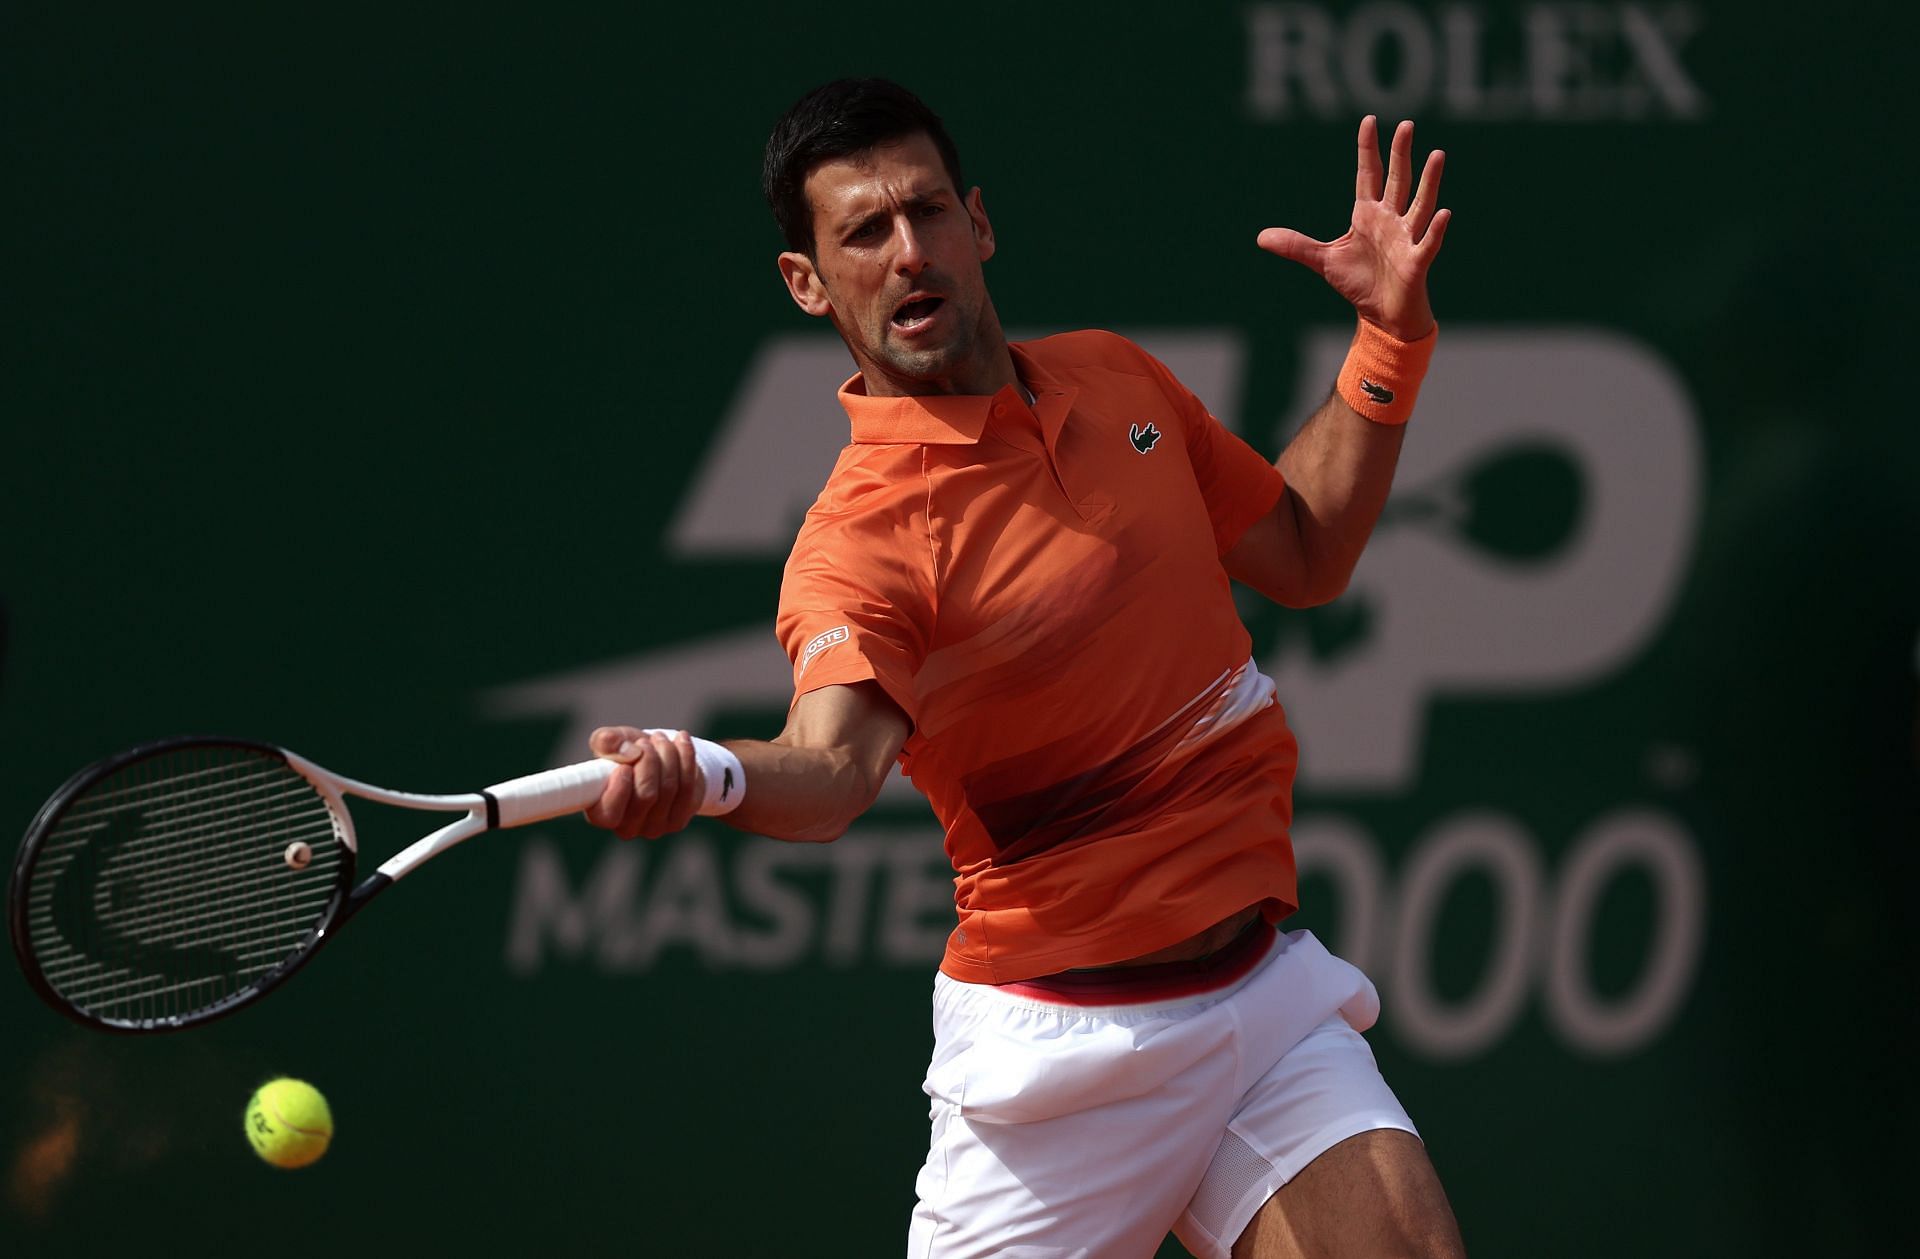 Novak Djokovic is one of the best players in tennis history.